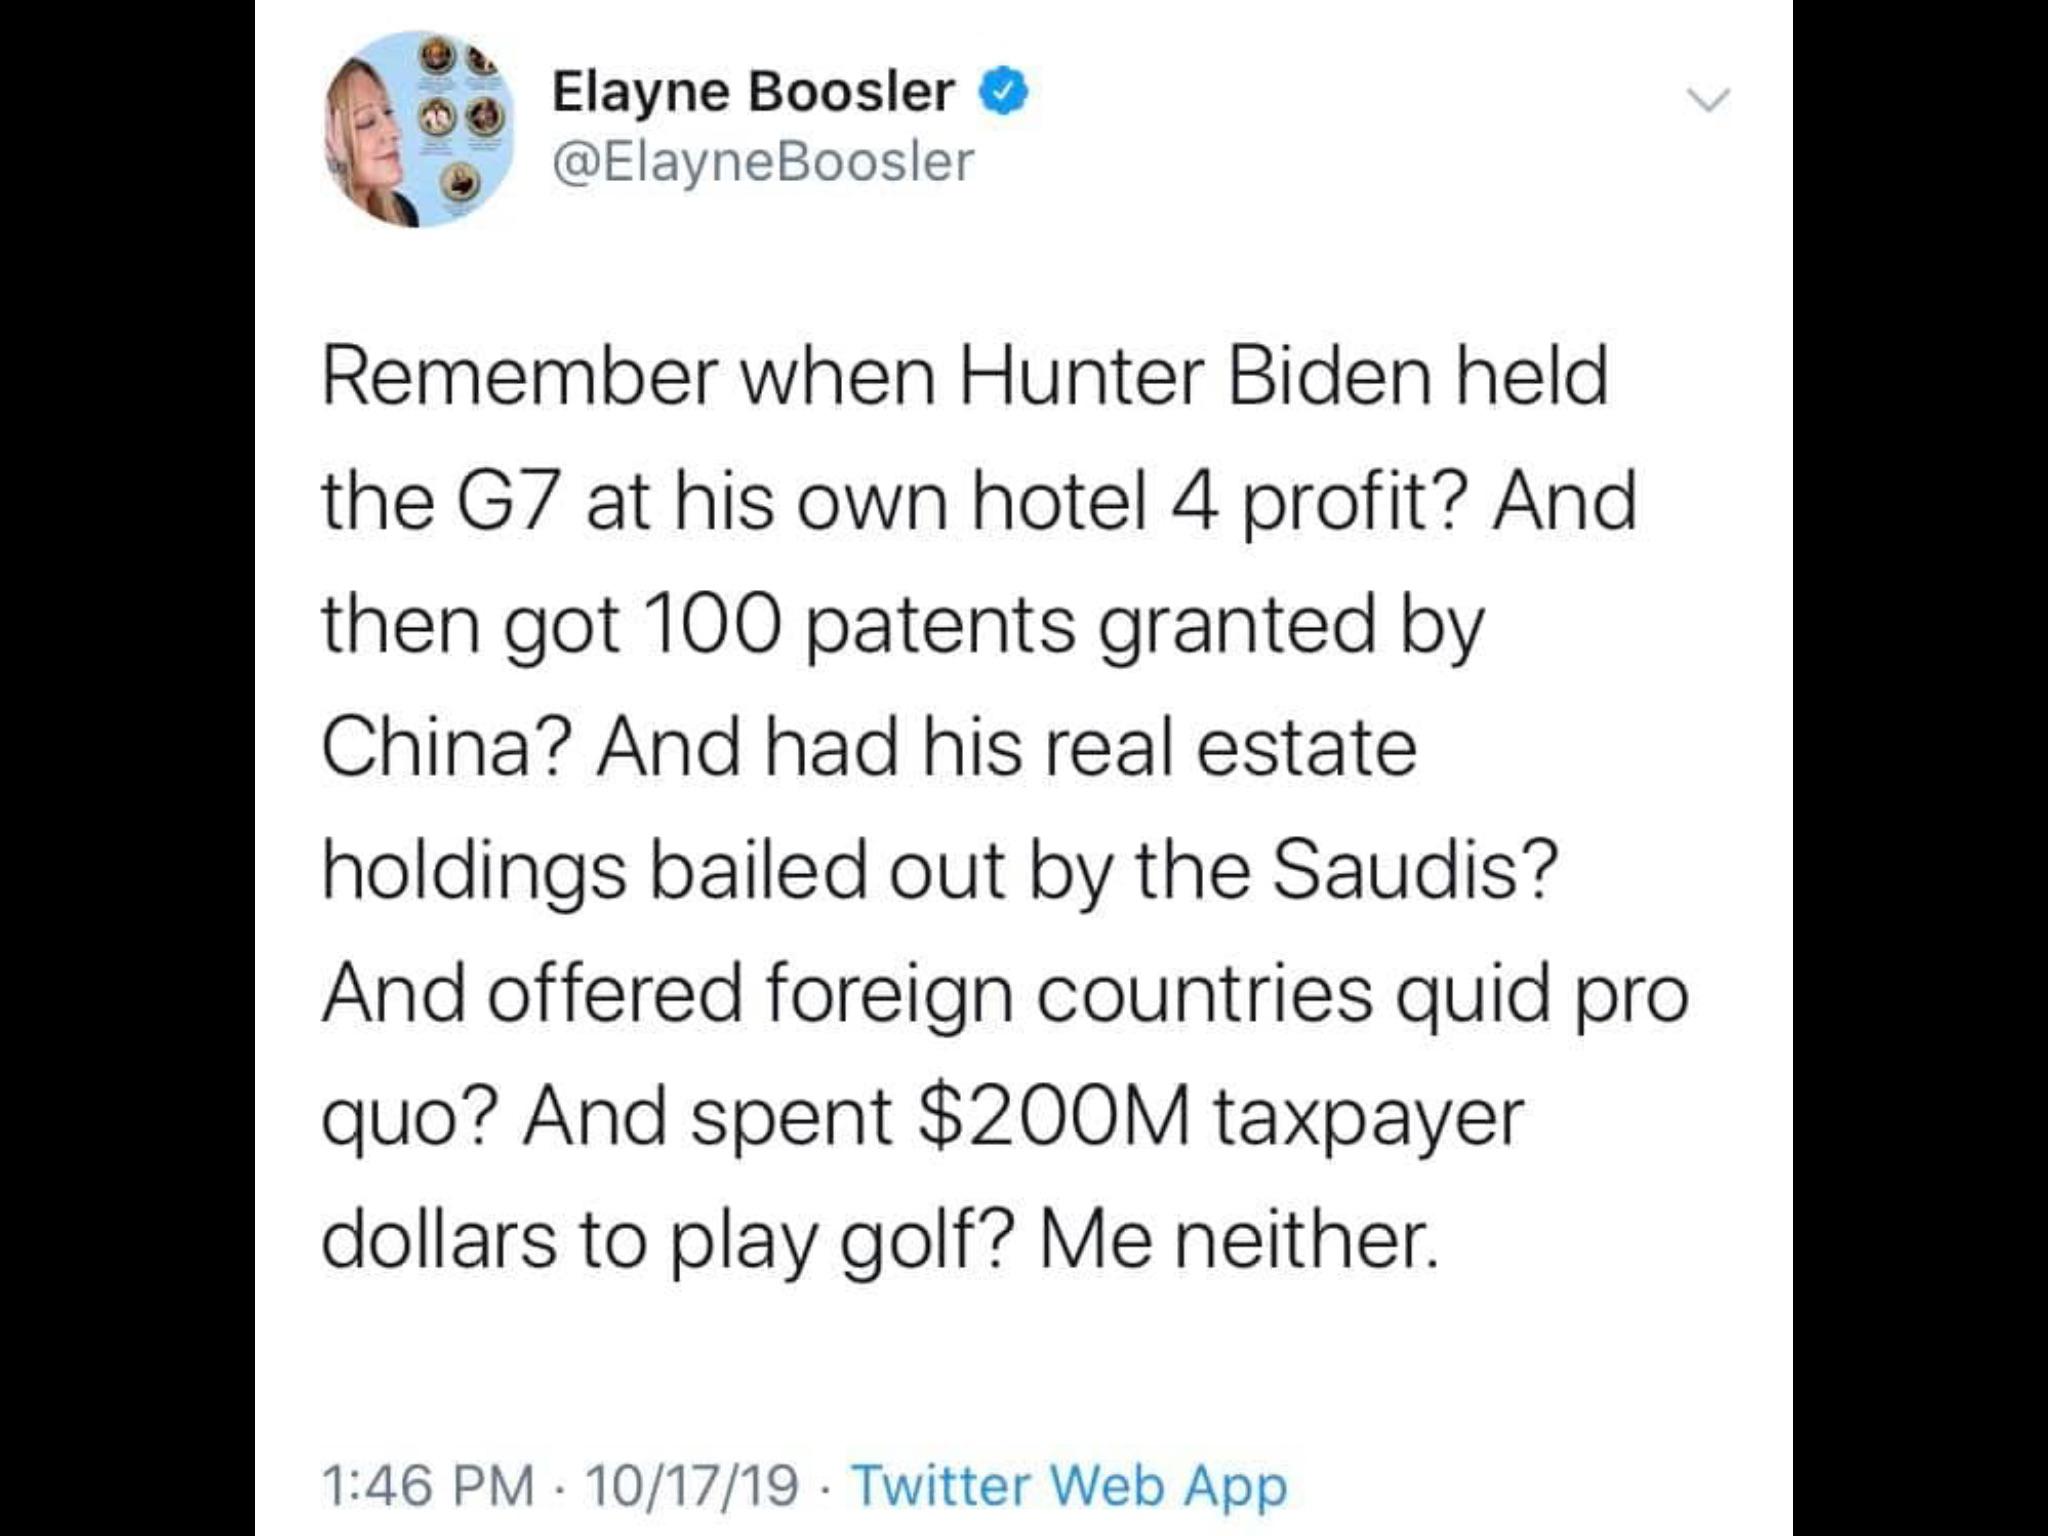 political political-memes political text: Elayne Booster O 3 @ElayneBoosler Remember when Hunter Biden held the G7 at his own hotel 4 profit? And then got 100 patents granted by China? And had his real estate holdings bailed out by the Saudis? And offered foreign countries quid pro quo? And spent $200M taxpayer dollars to play golf? Me neither. 1:46 PM • 10/17/19 • Twitter Web App 